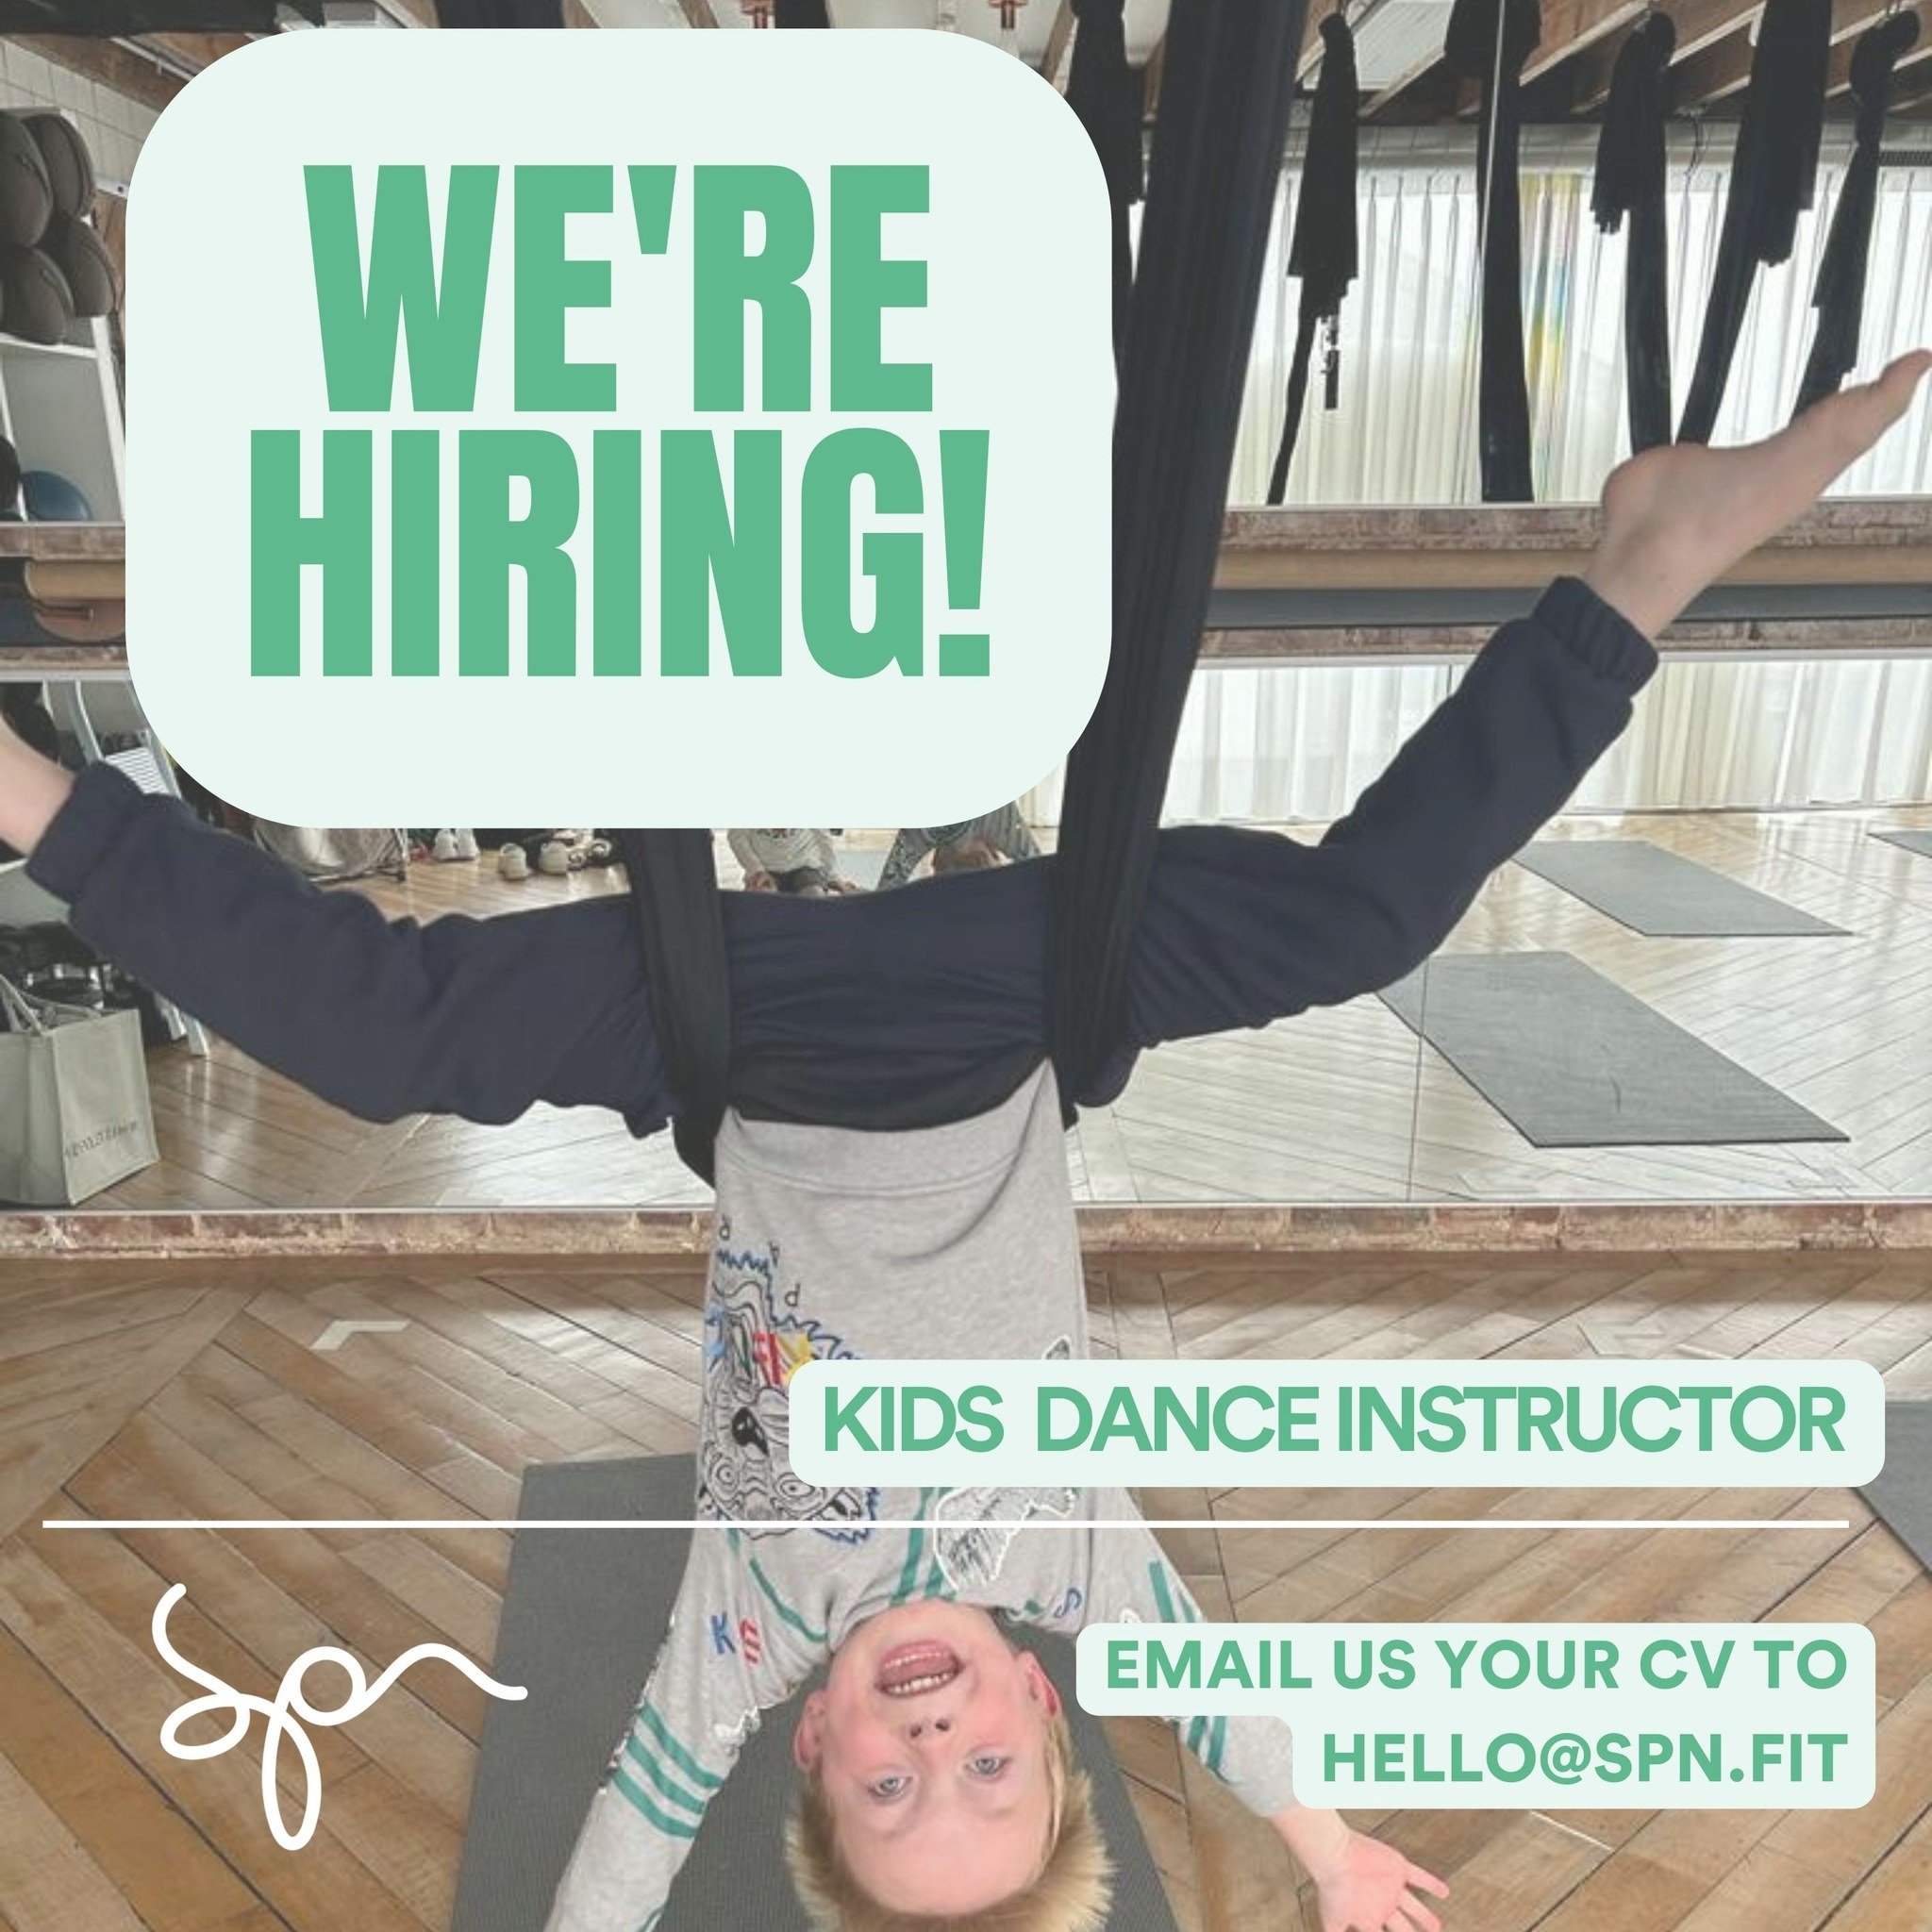 We're looking for a new member of the team! 💚
Must have:
- qualification in dance / performing arts
- previous experience working with children
- proof of DBS check
- bags of energy and a can-do attitude
- availability at weekends

Aerial silks expe